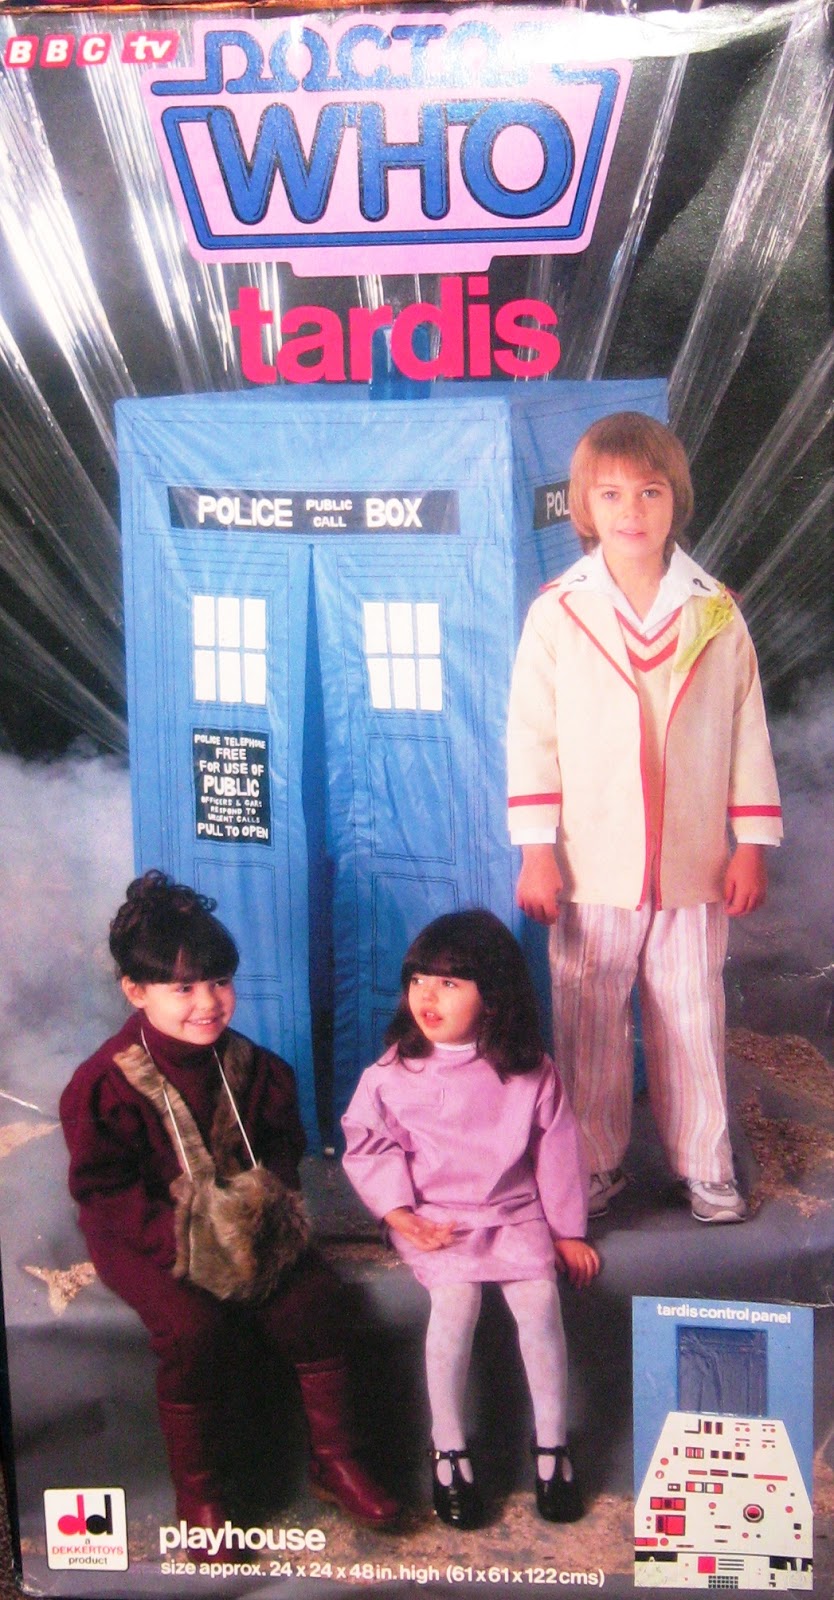 John Kenneth Muir's Reflections on Cult Movies and Classic TV: Collectible  of the Week: Doctor Who Tardis Playhouse (Dekker Toys; 1982)